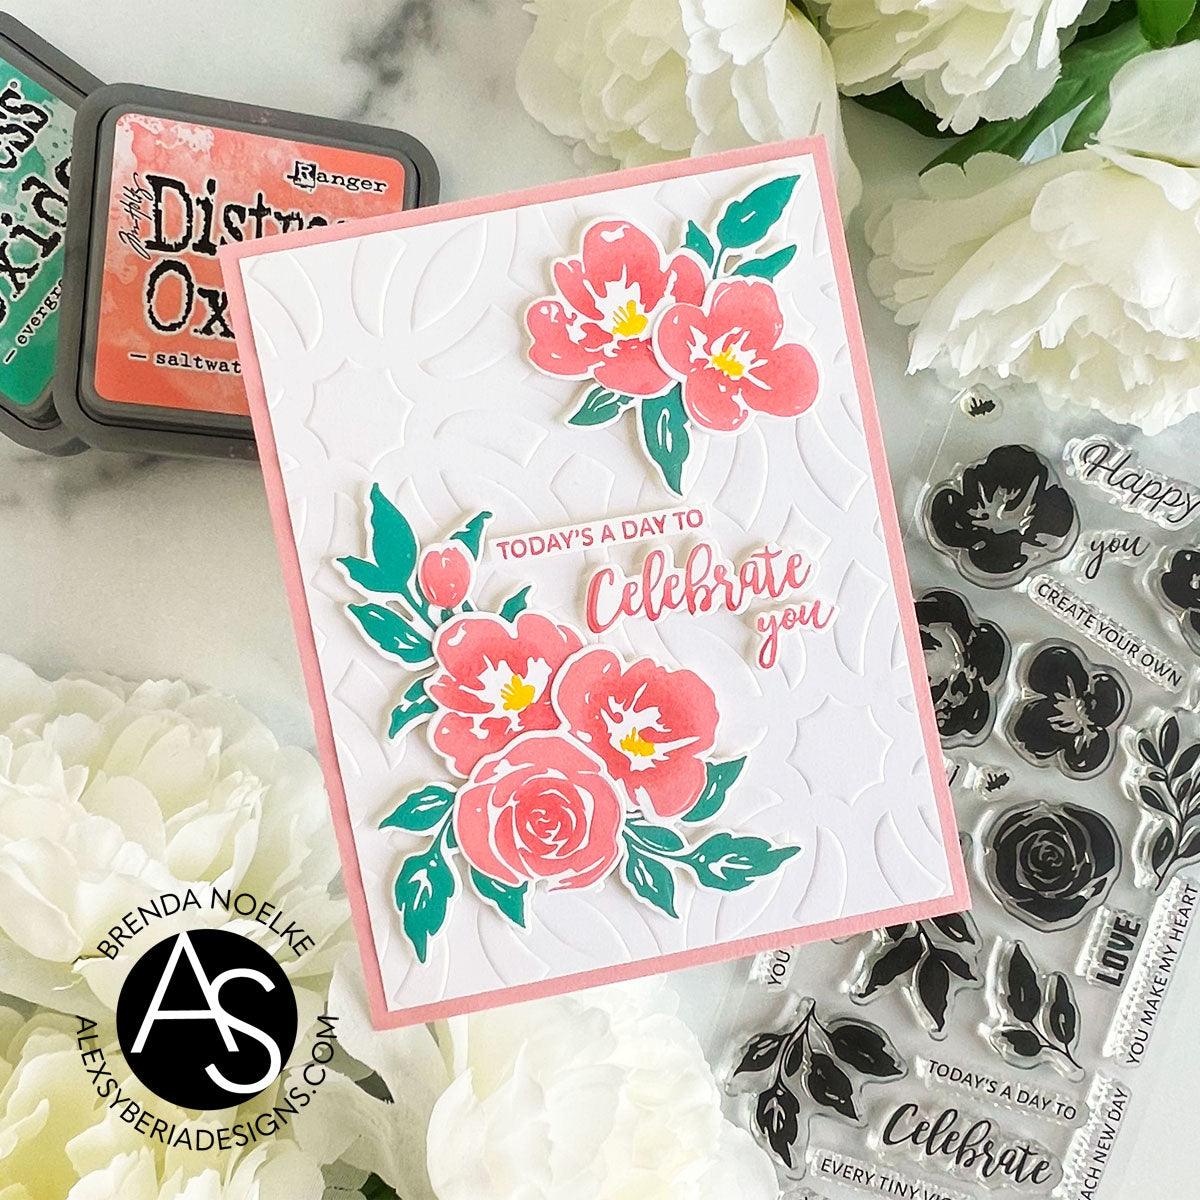 alex-syberia-designs-floral-stamps-watercoloring-die-cutting-cardmaking-tutorial-dry-embossing